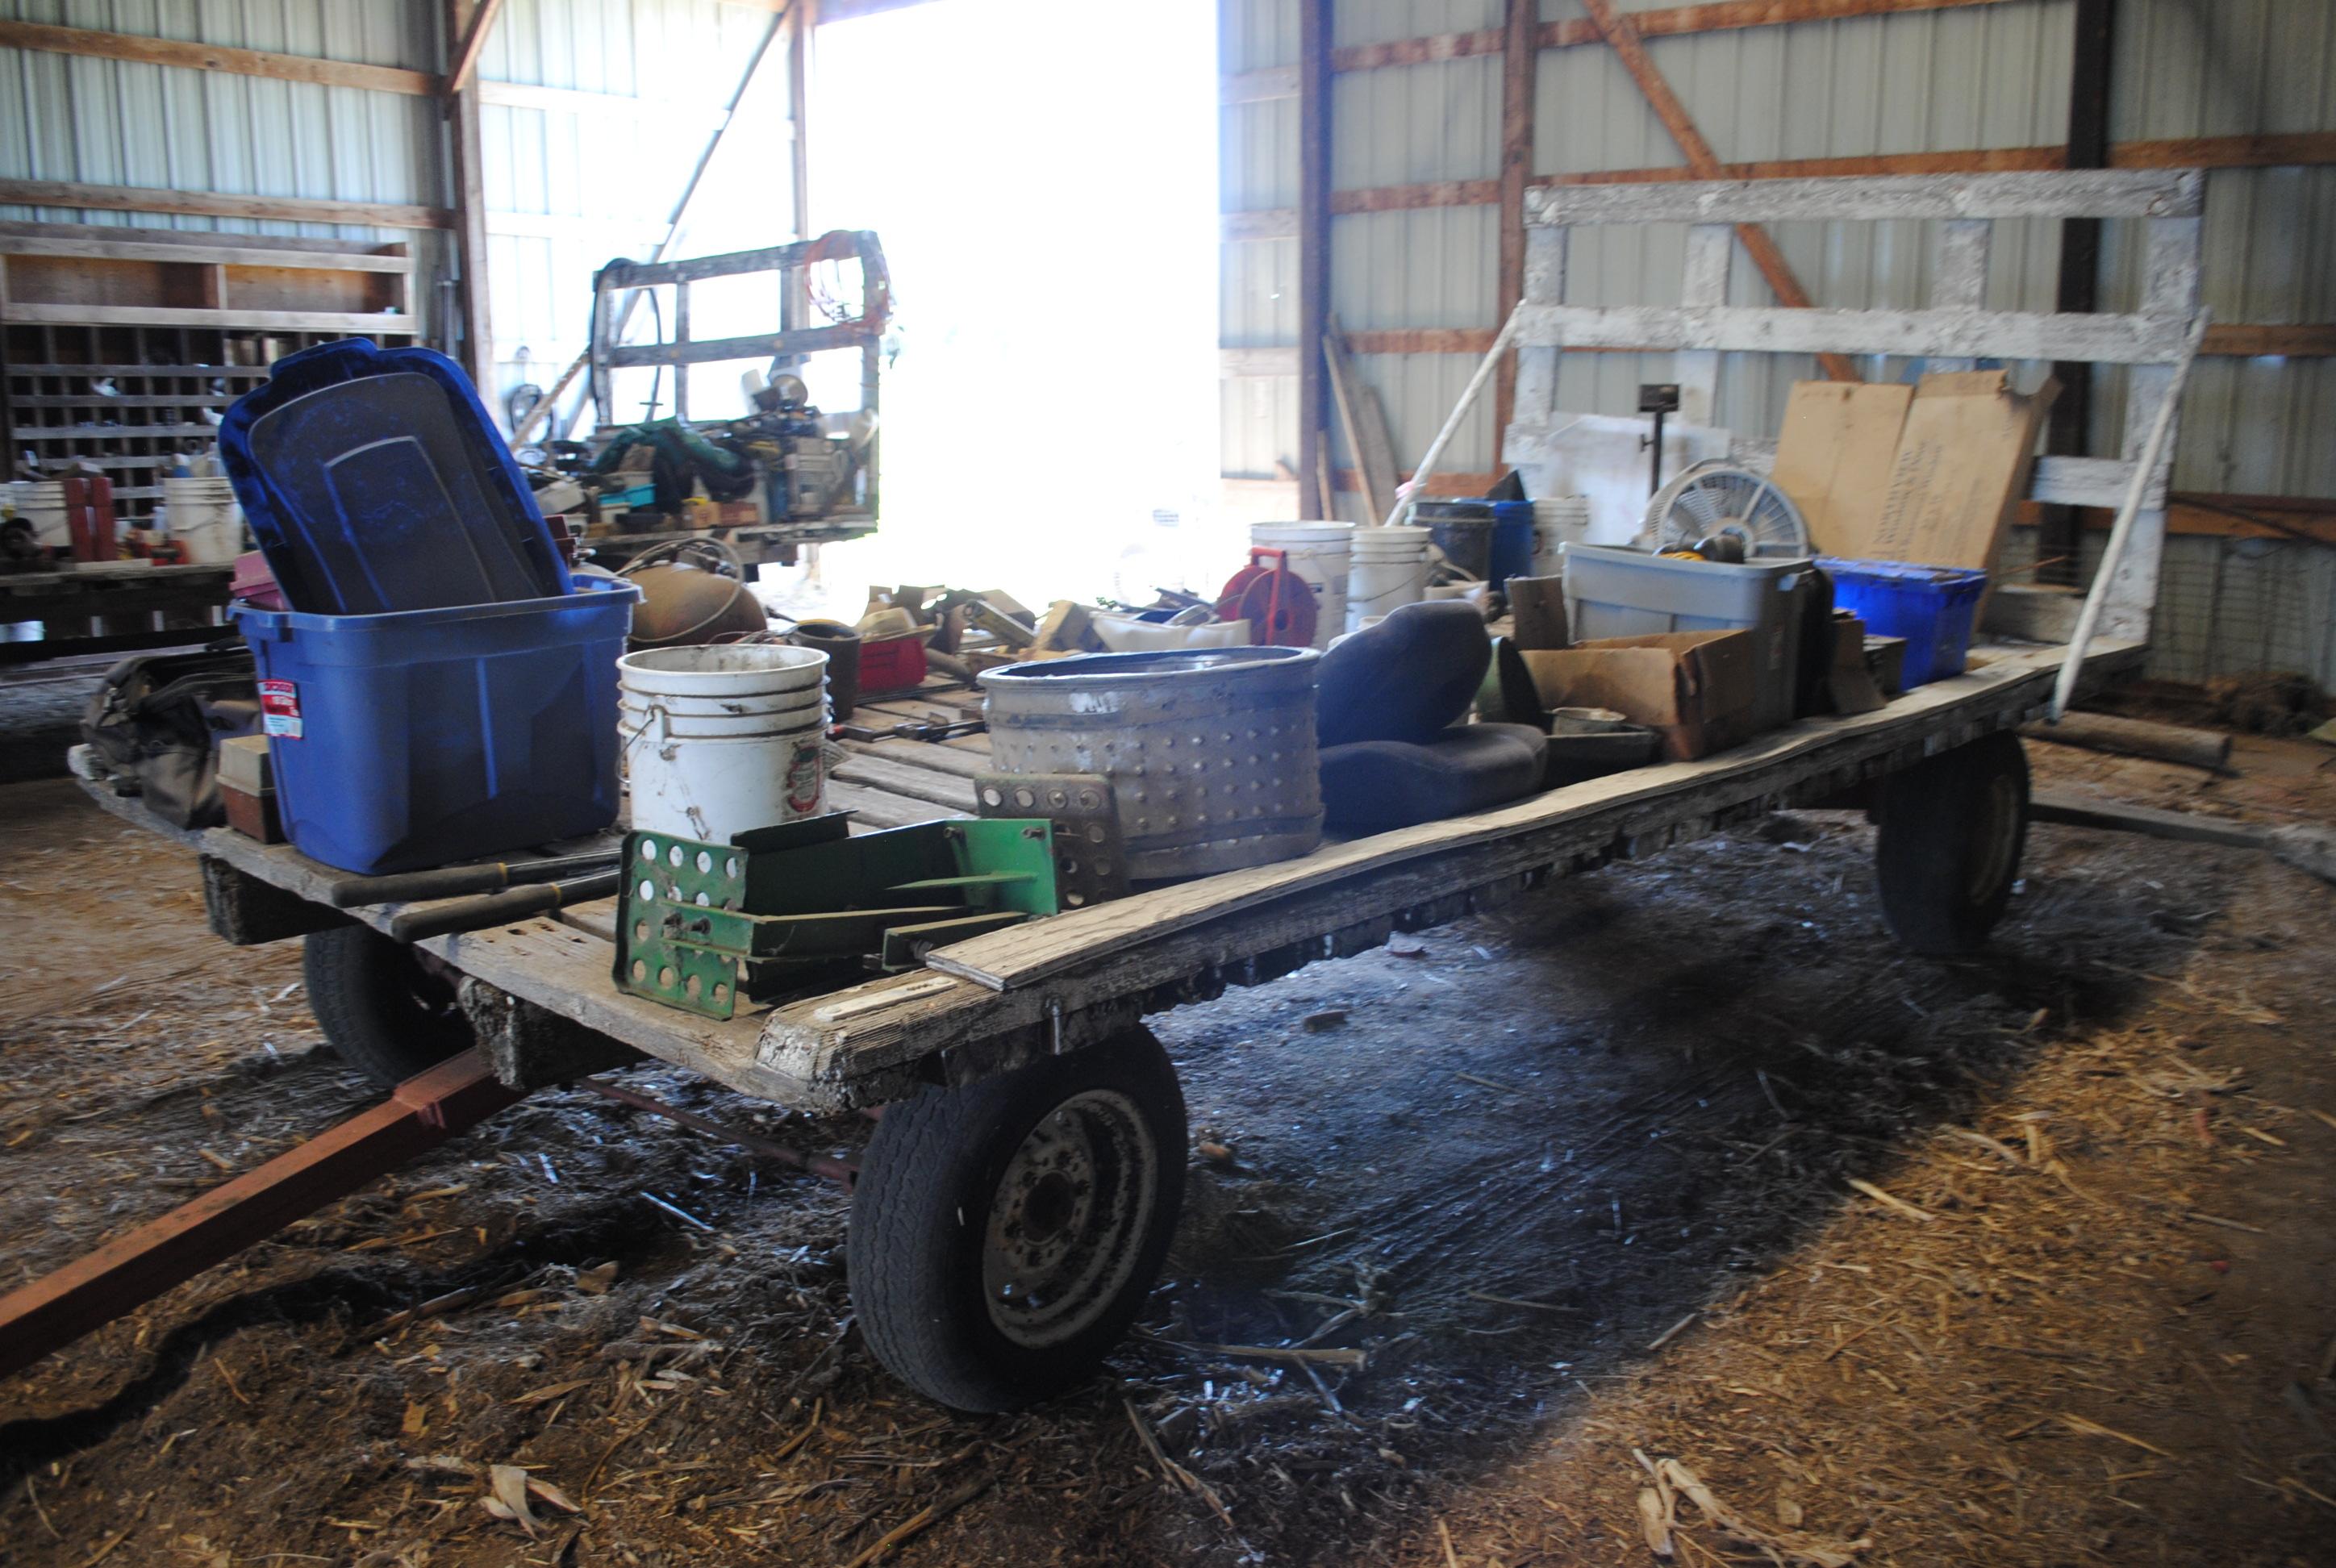 8'x17' Hay Rack on 4-wheel running gear (Contents not included)